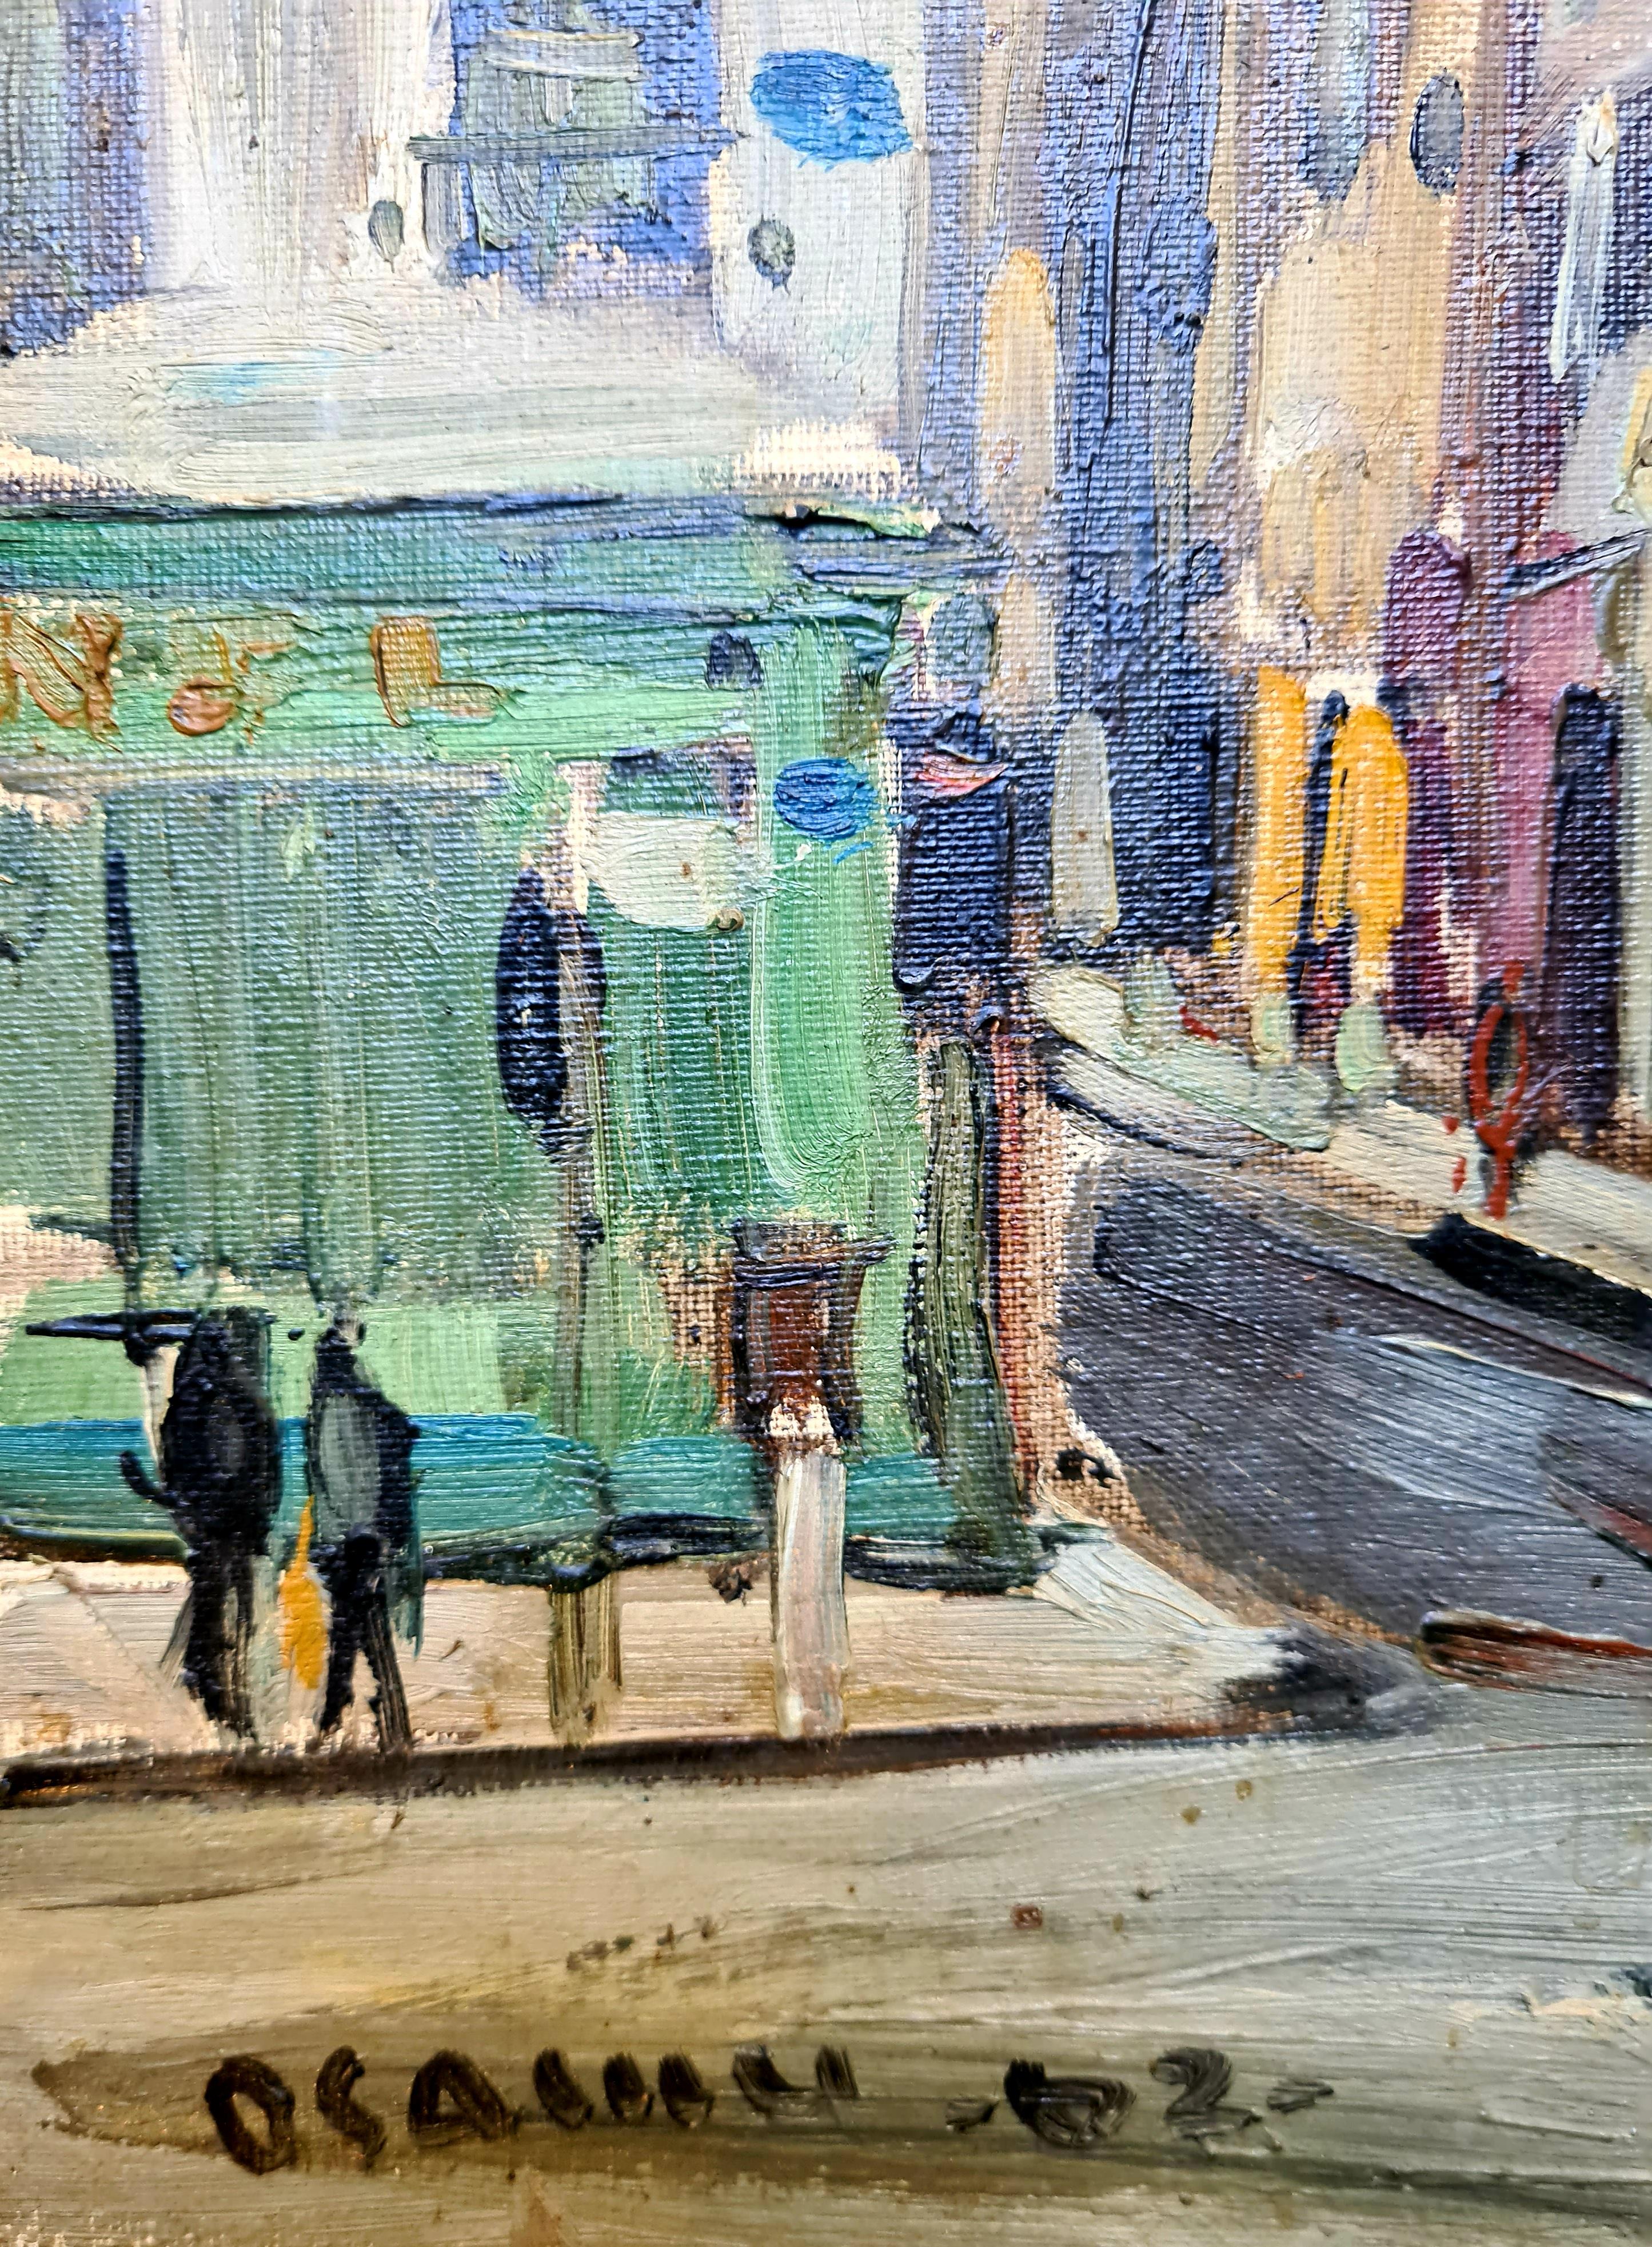 1960s oil on canvas view of the streets around Montparnasse, Paris by Osamu Komma 近馬 治. The painting is signed and dated bottom left and there is script to the back of the canvas. ミッドセンチュリーパリの油絵

A charming and atmospheric painting of the iconic